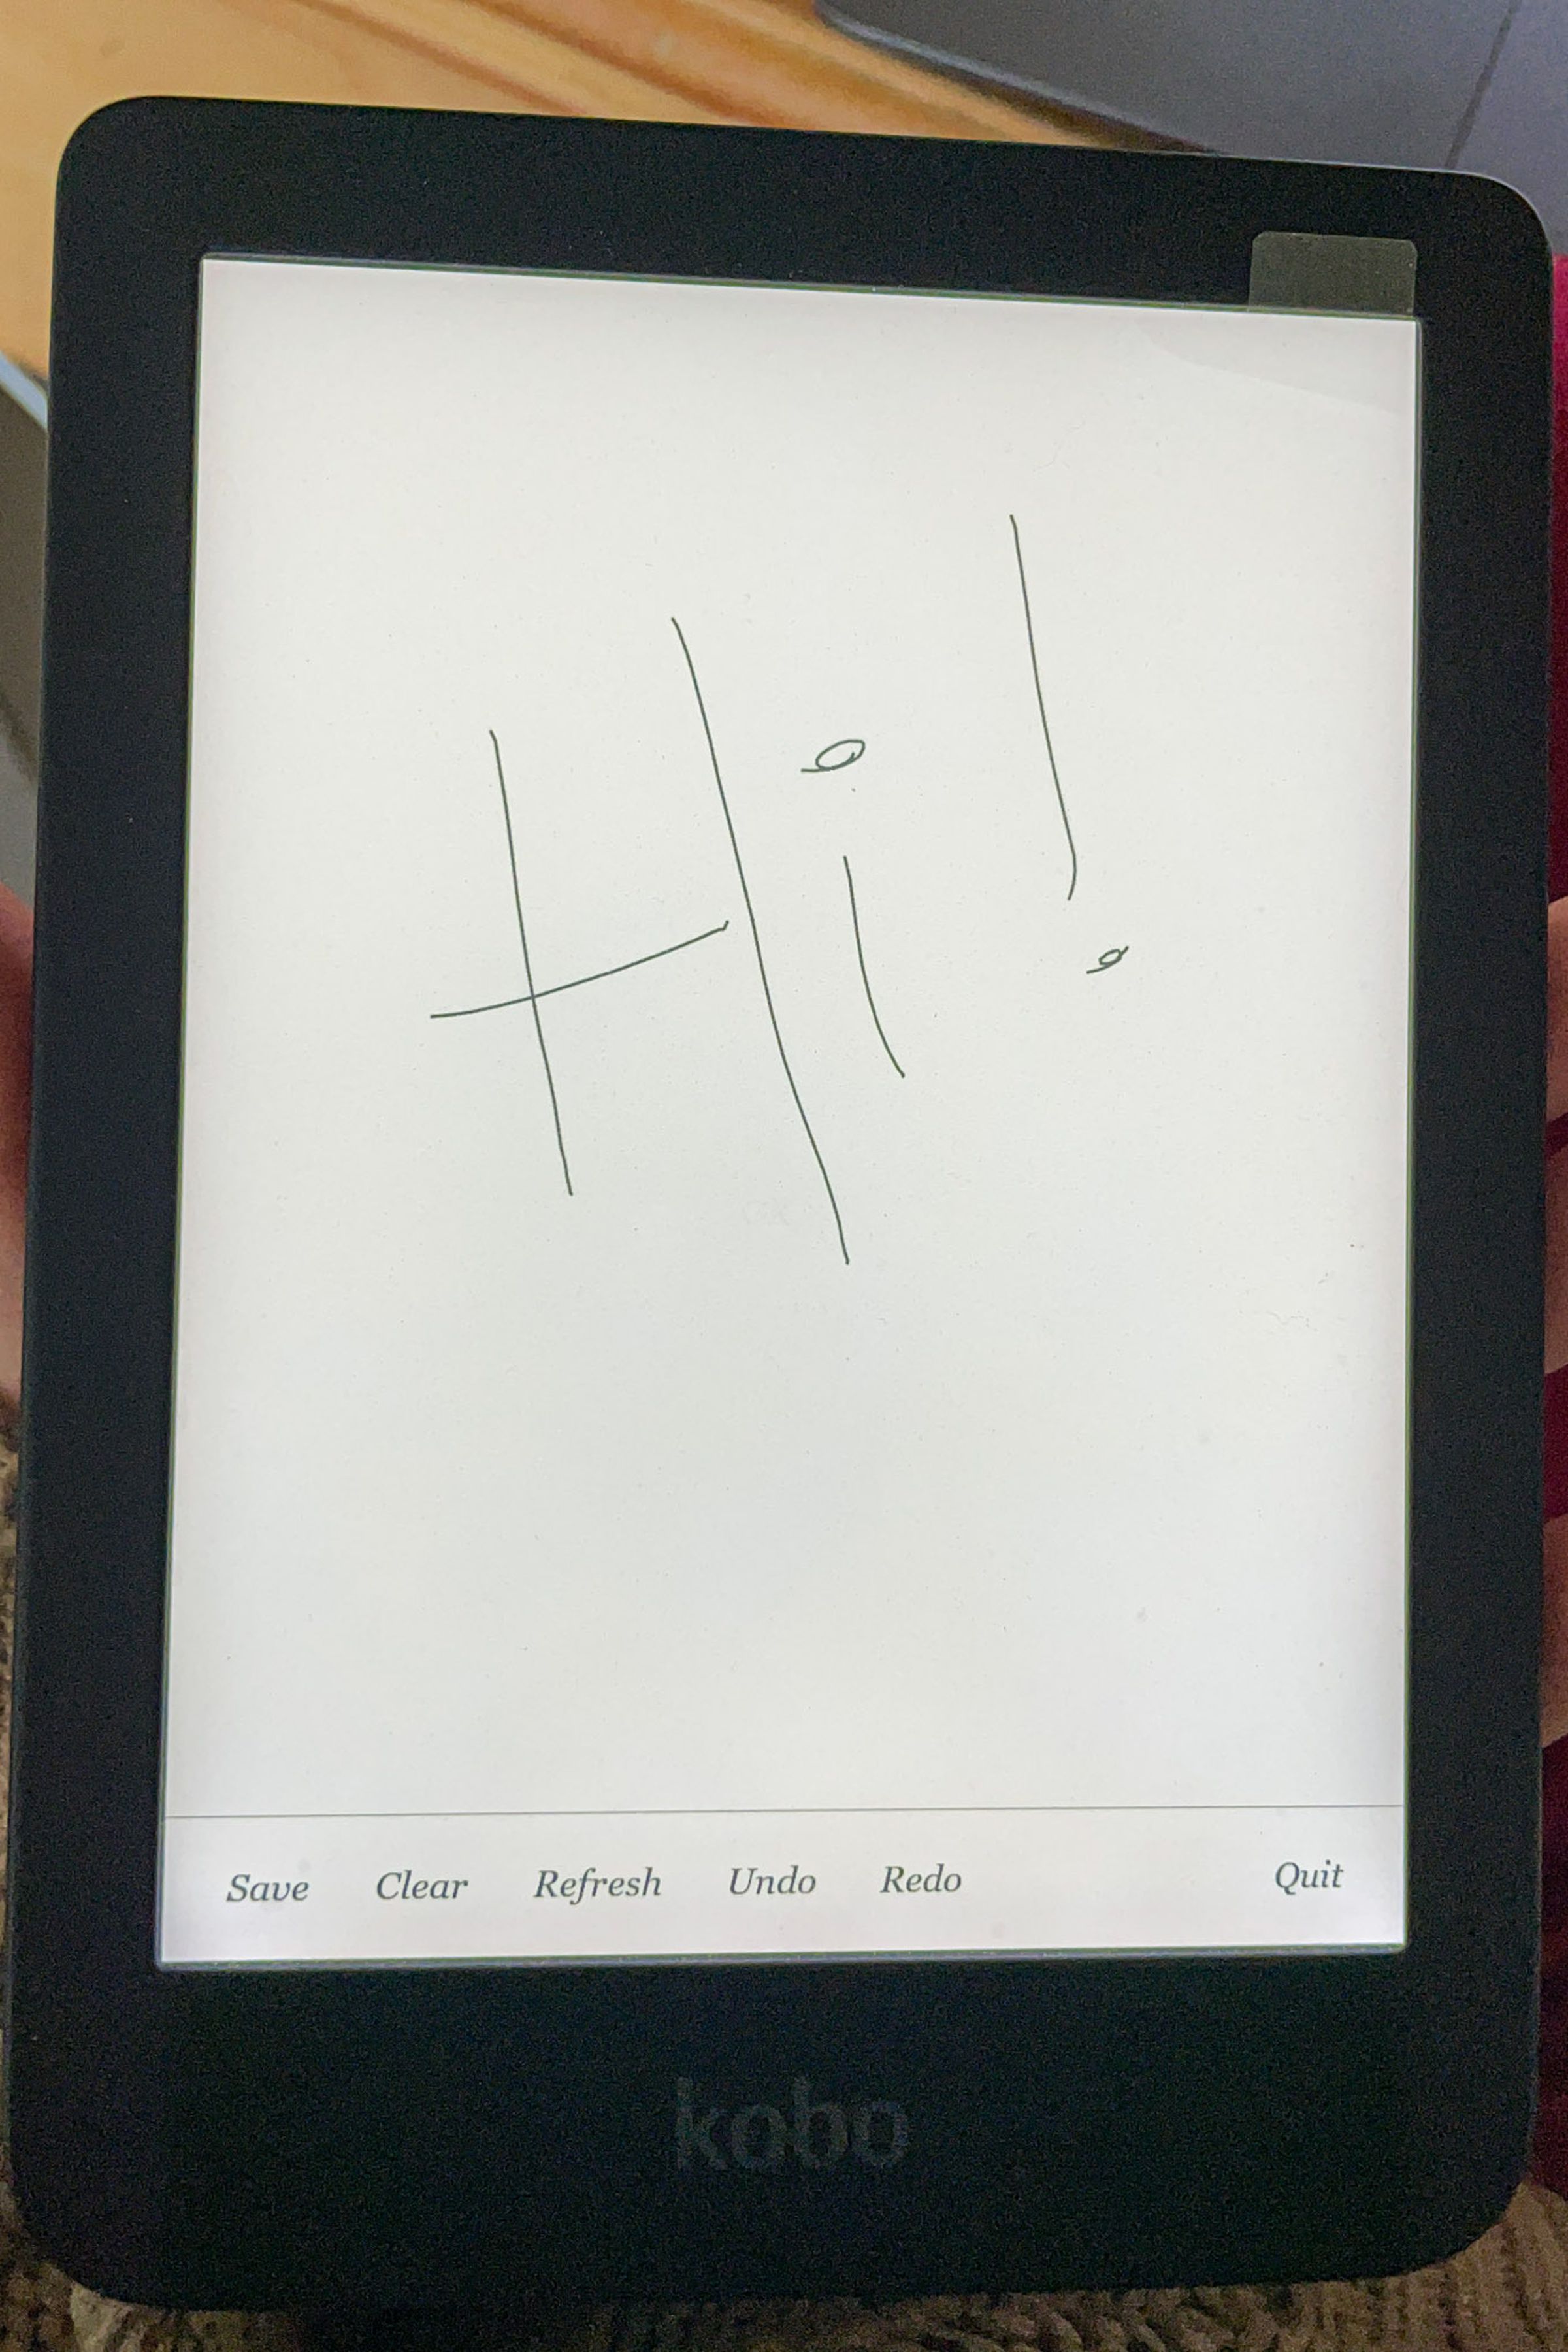 A hand holding up the Kobo Clara 2E. Its screen is on and open to the experimental sketchbook app, where the word “Hi” is written in handwriting.